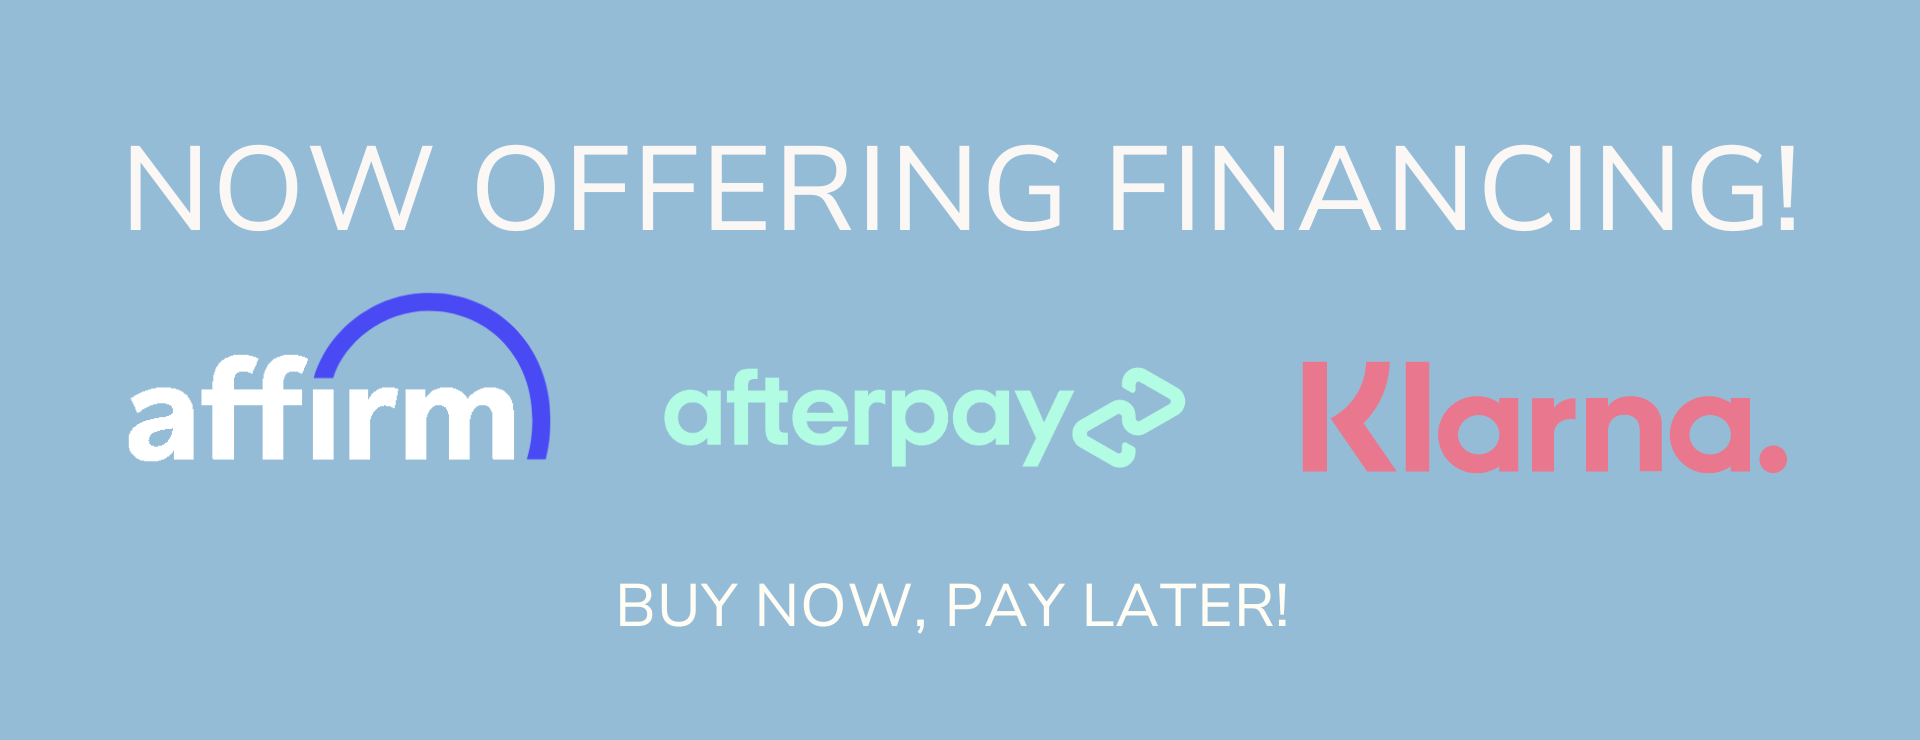 Now Offering Financing! Buy now, pay later. Partners: Affirm, Afterpay, and Klarna.